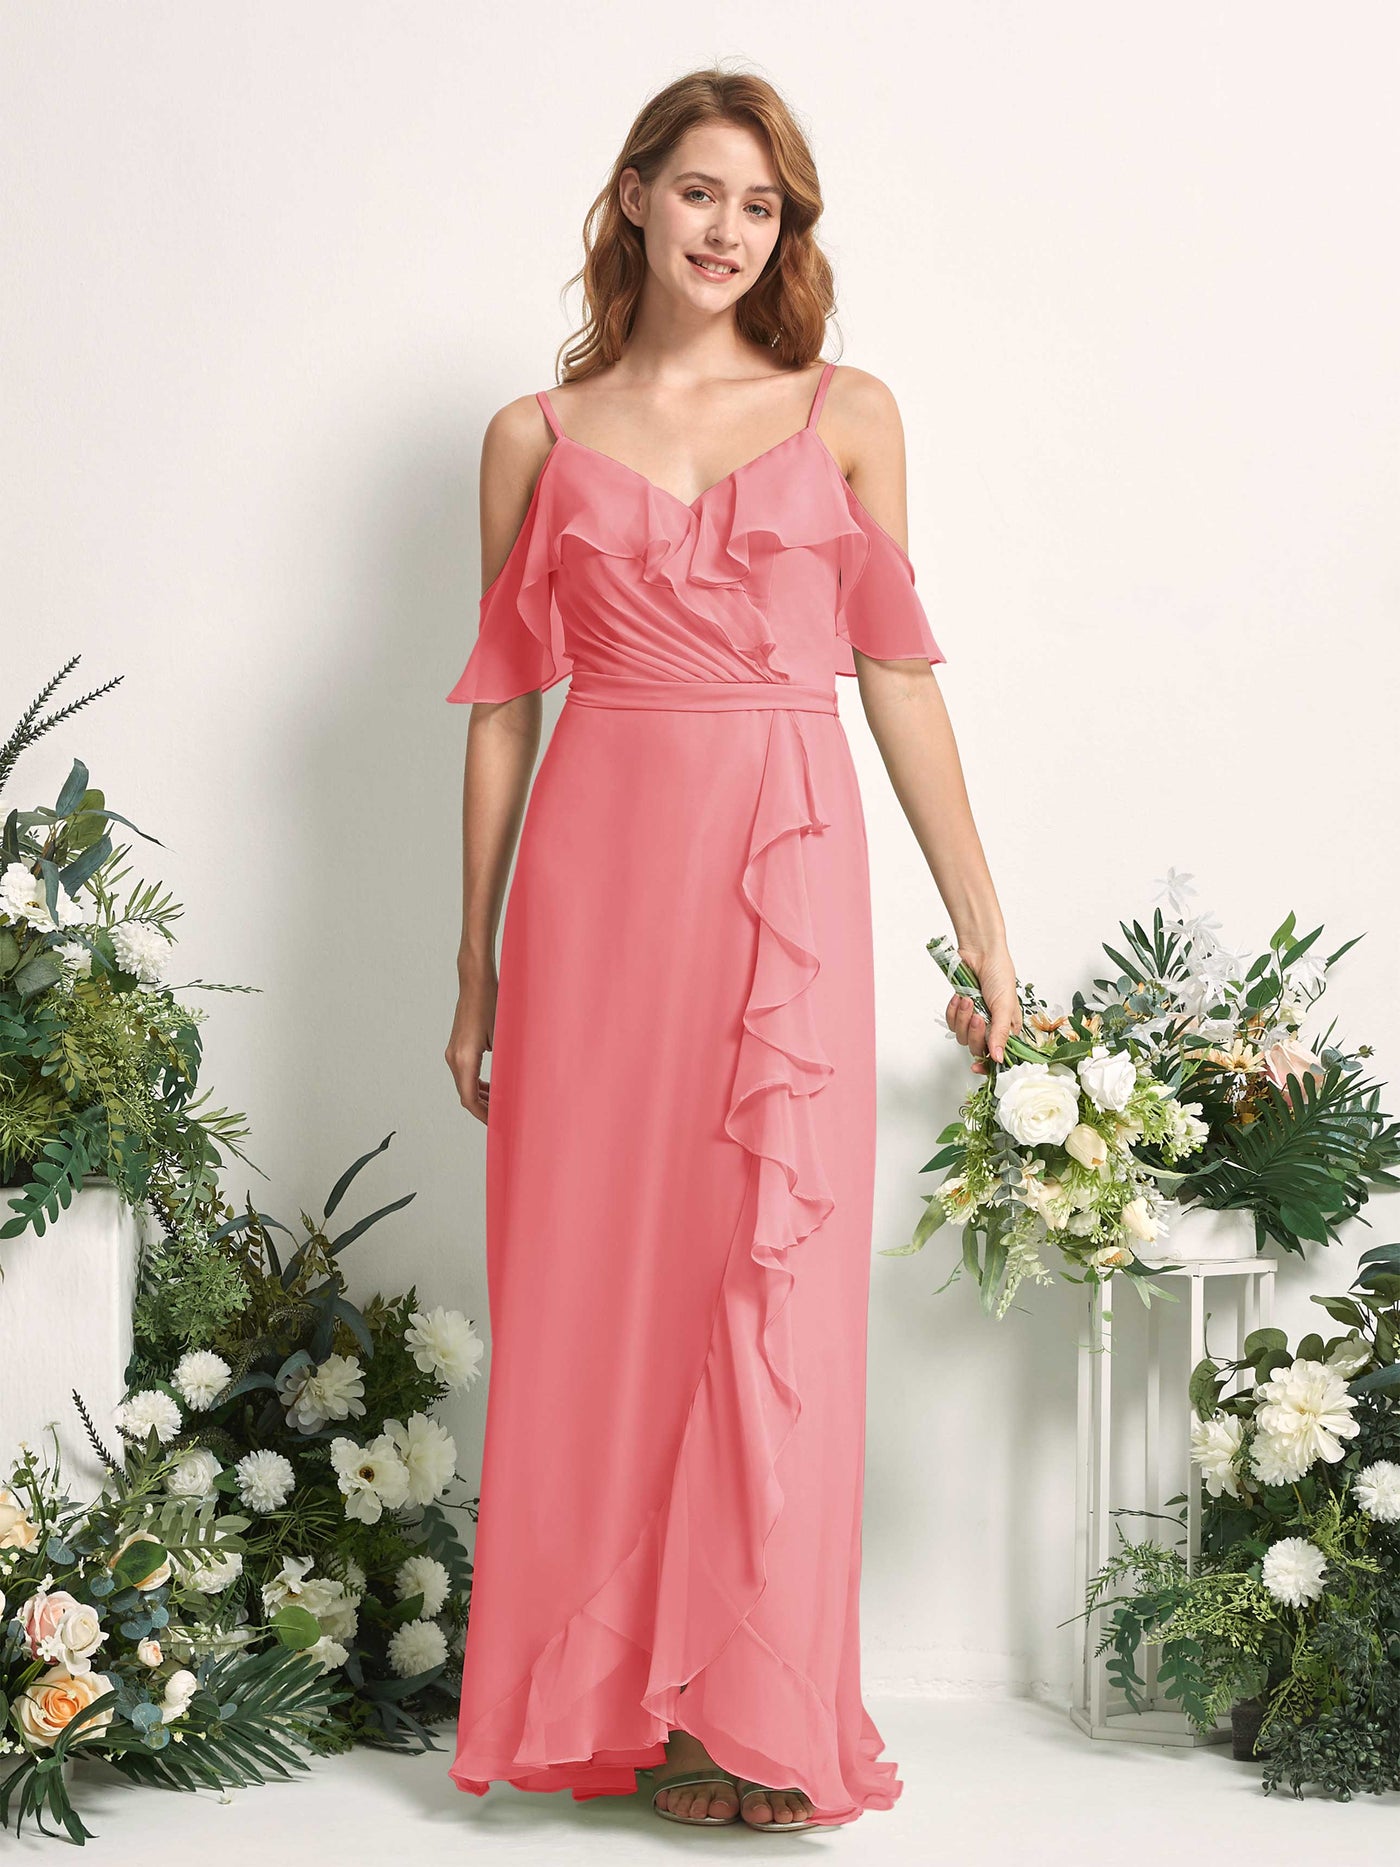 Bridesmaid Dress A-line Chiffon Spaghetti-straps Full Length Sleeveless Wedding Party Dress - Coral Pink (81227430)#color_coral-pink